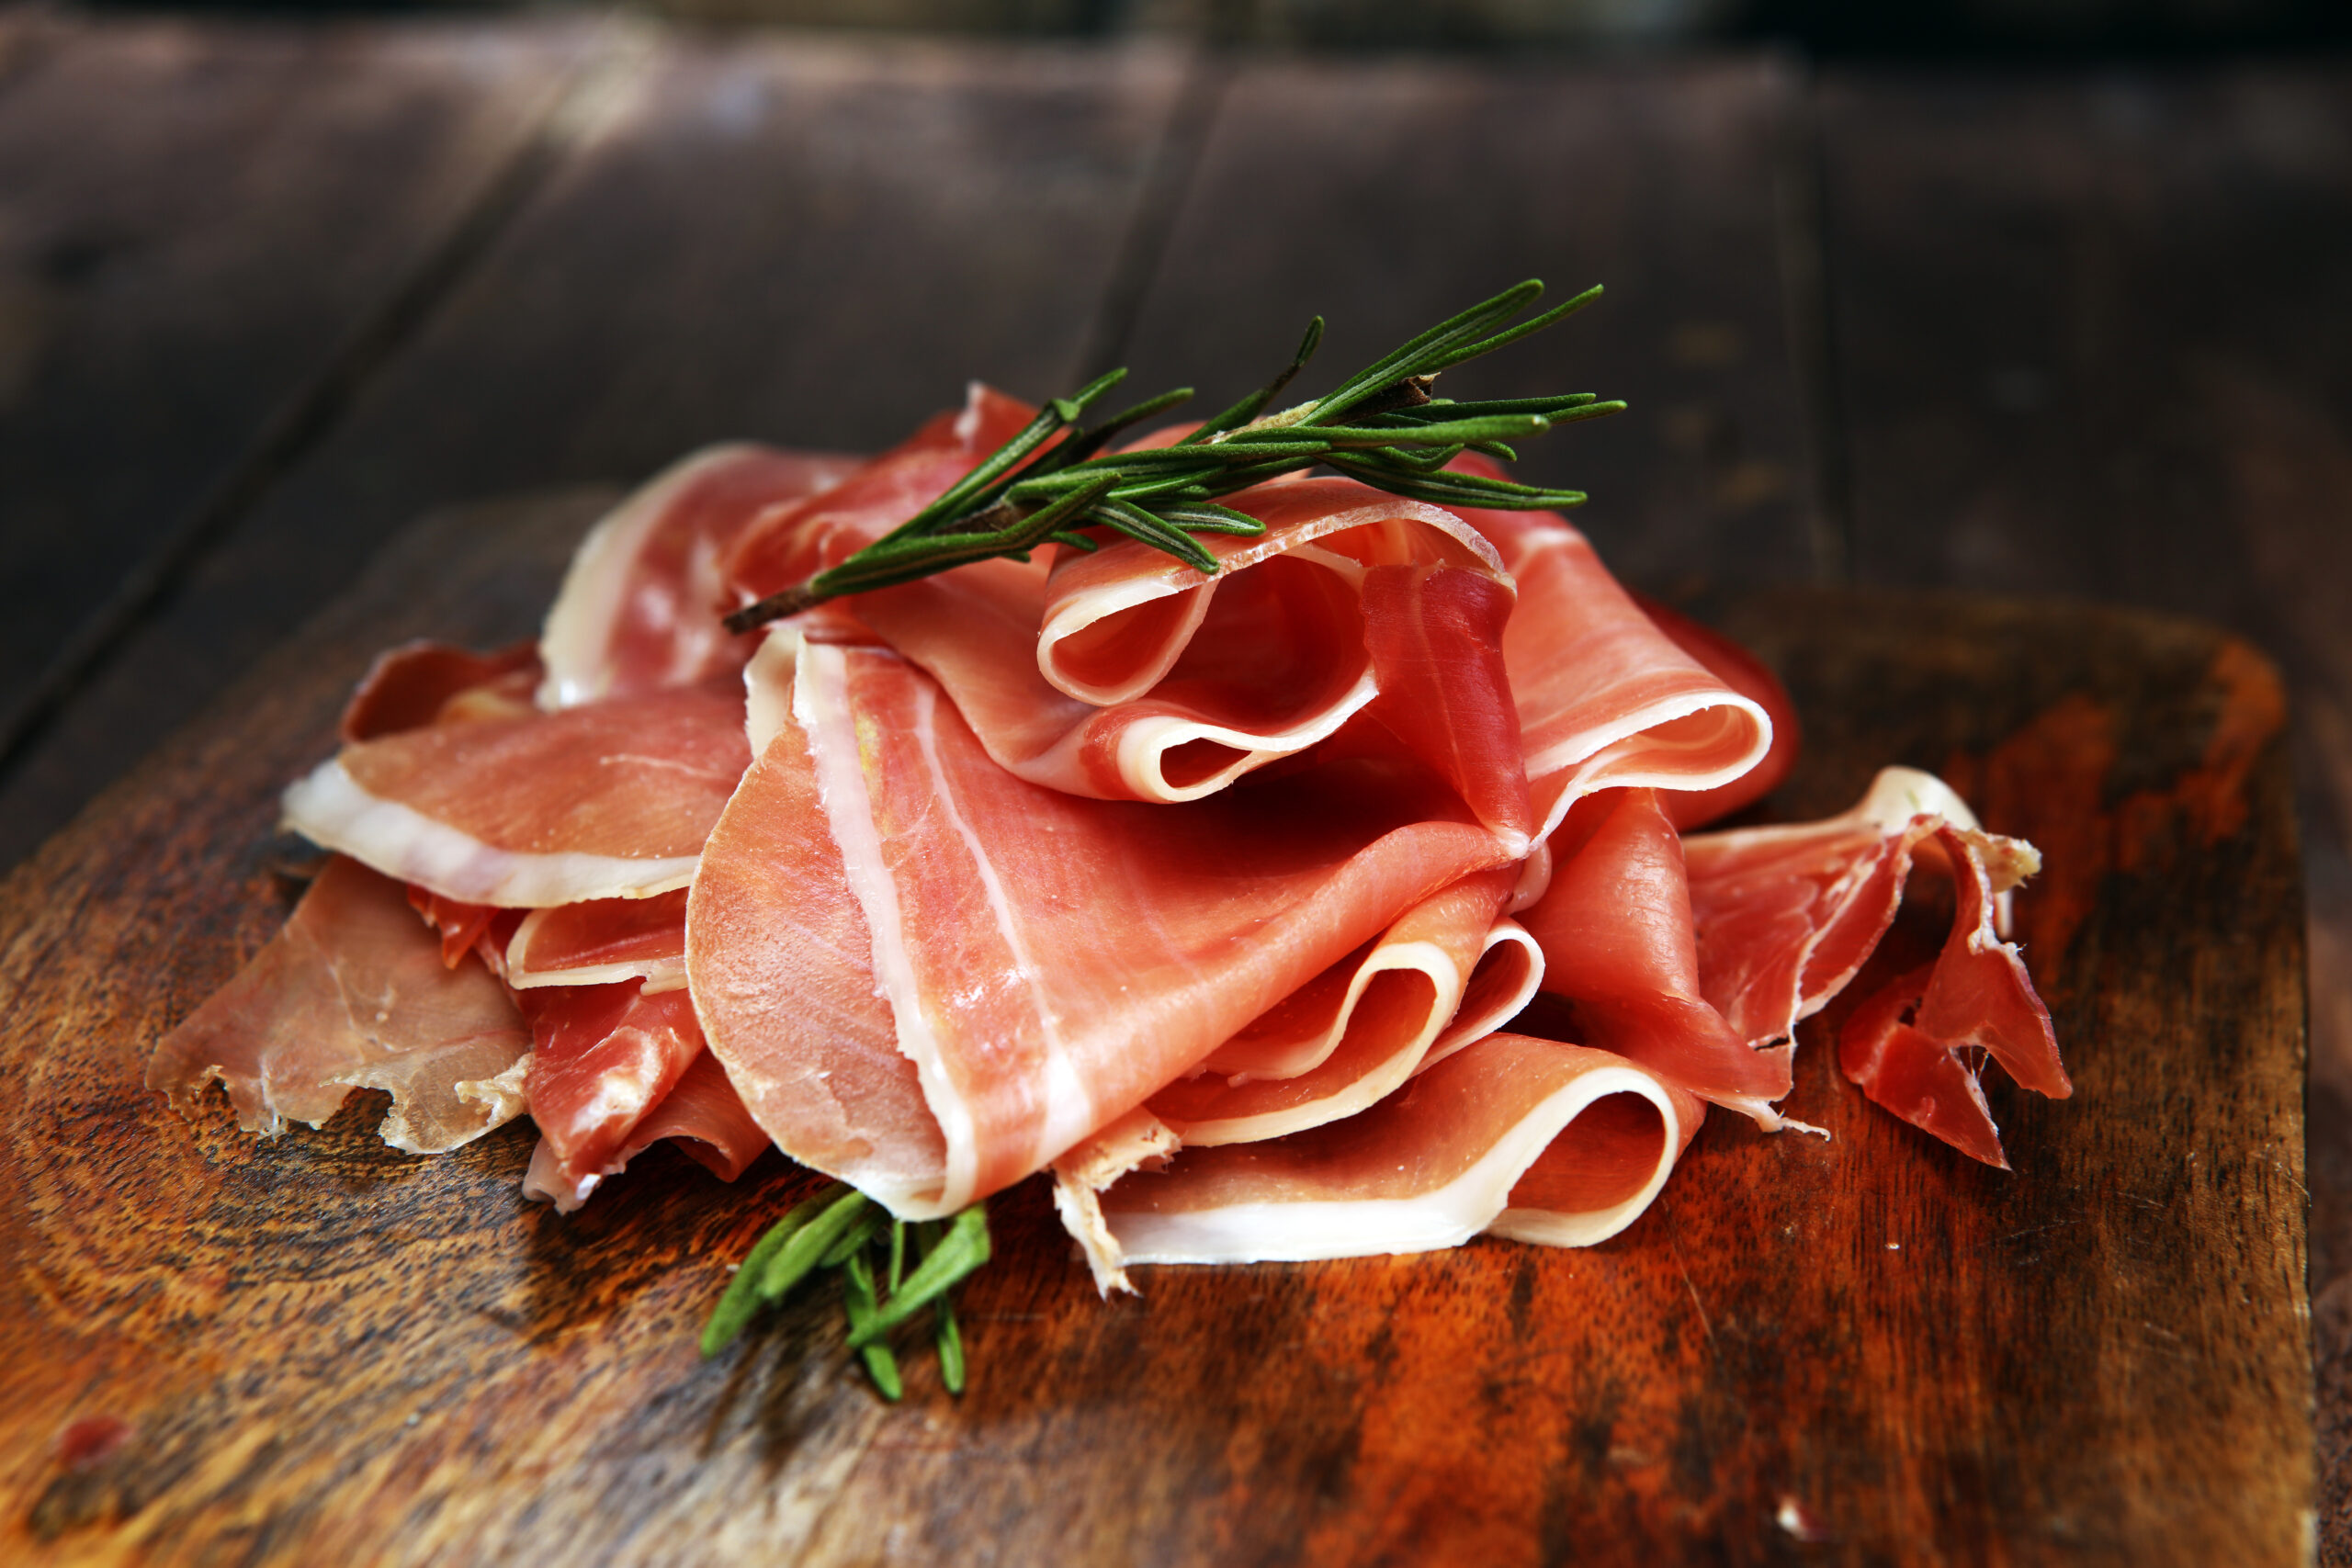 85,984-pounds-of-prosciutto-ham-are-withdrawn-from-the-market-due-to-lack-of-inspection